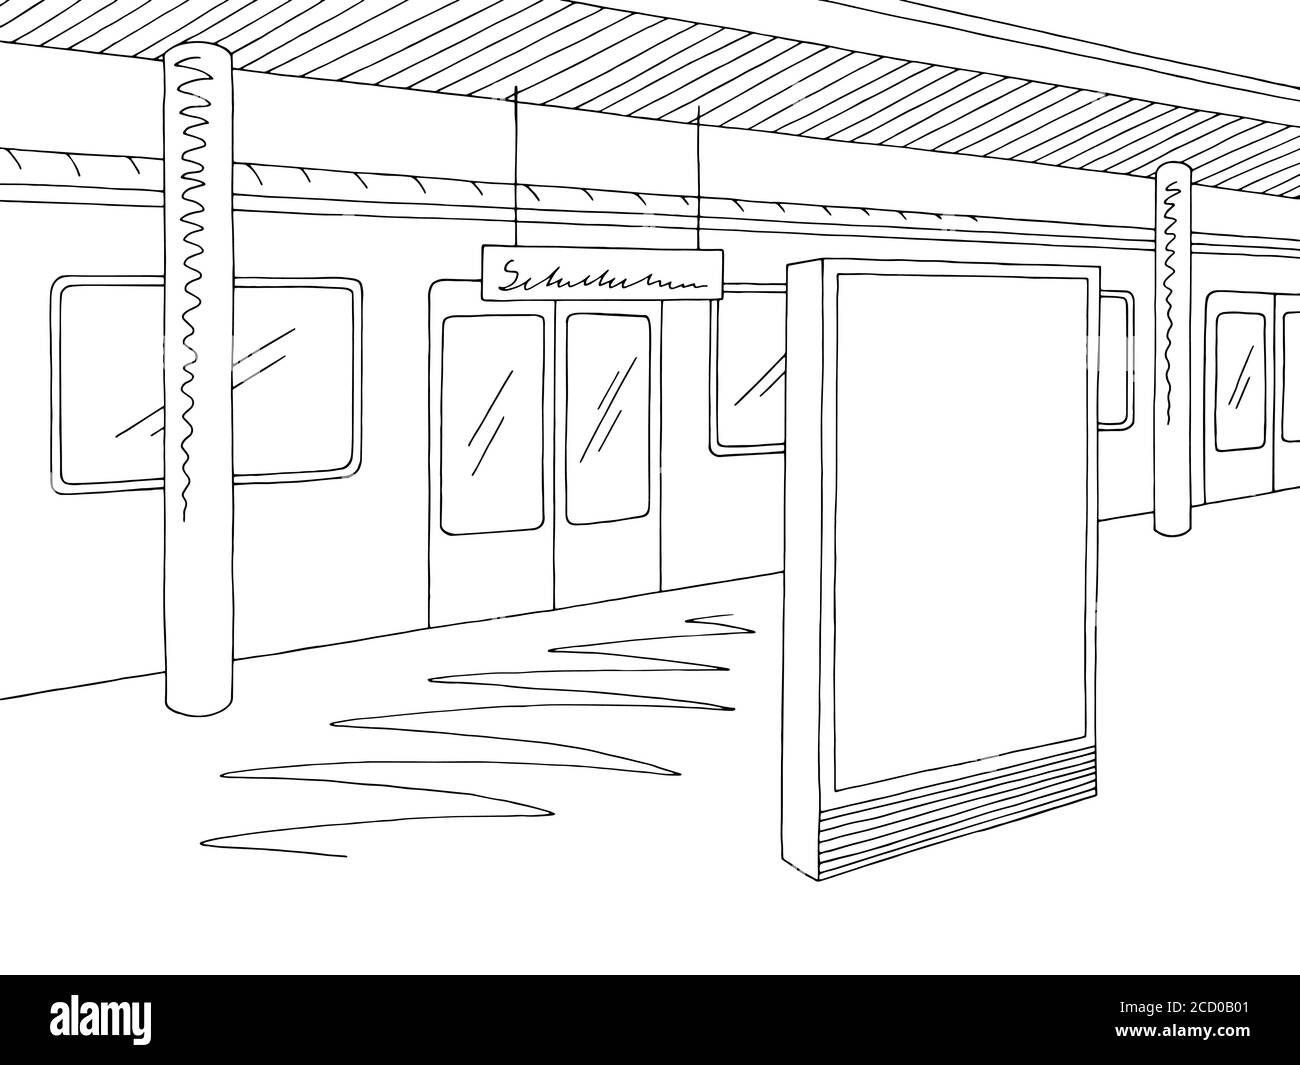 10724 Train Station Drawing Images Stock Photos  Vectors  Shutterstock